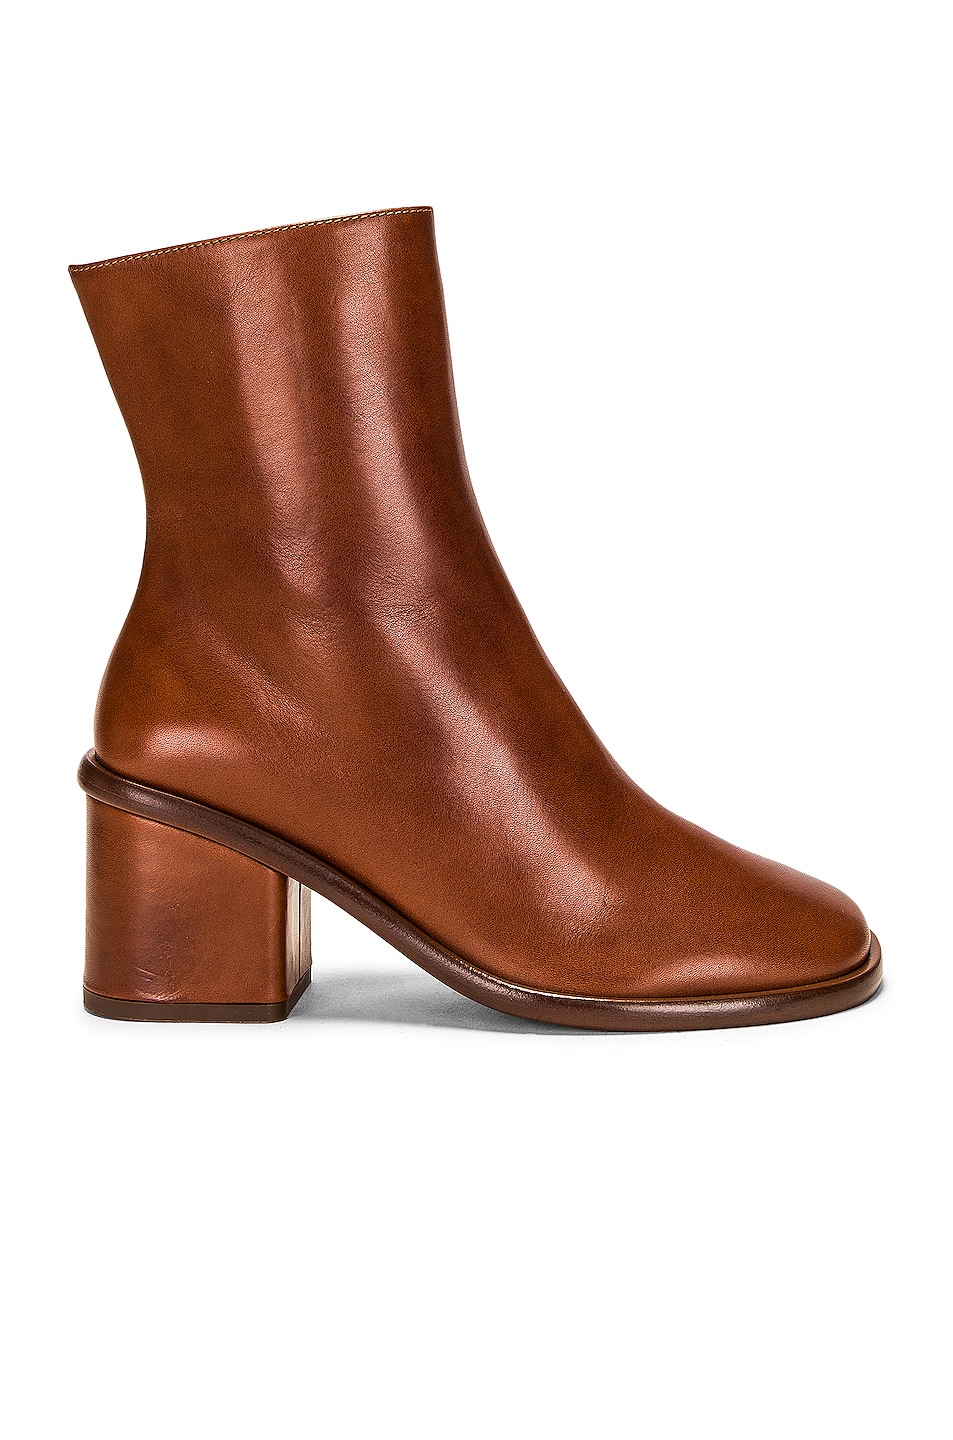 Image 1 of Chloe Meganne Ankle Boots in Rosewood Brown